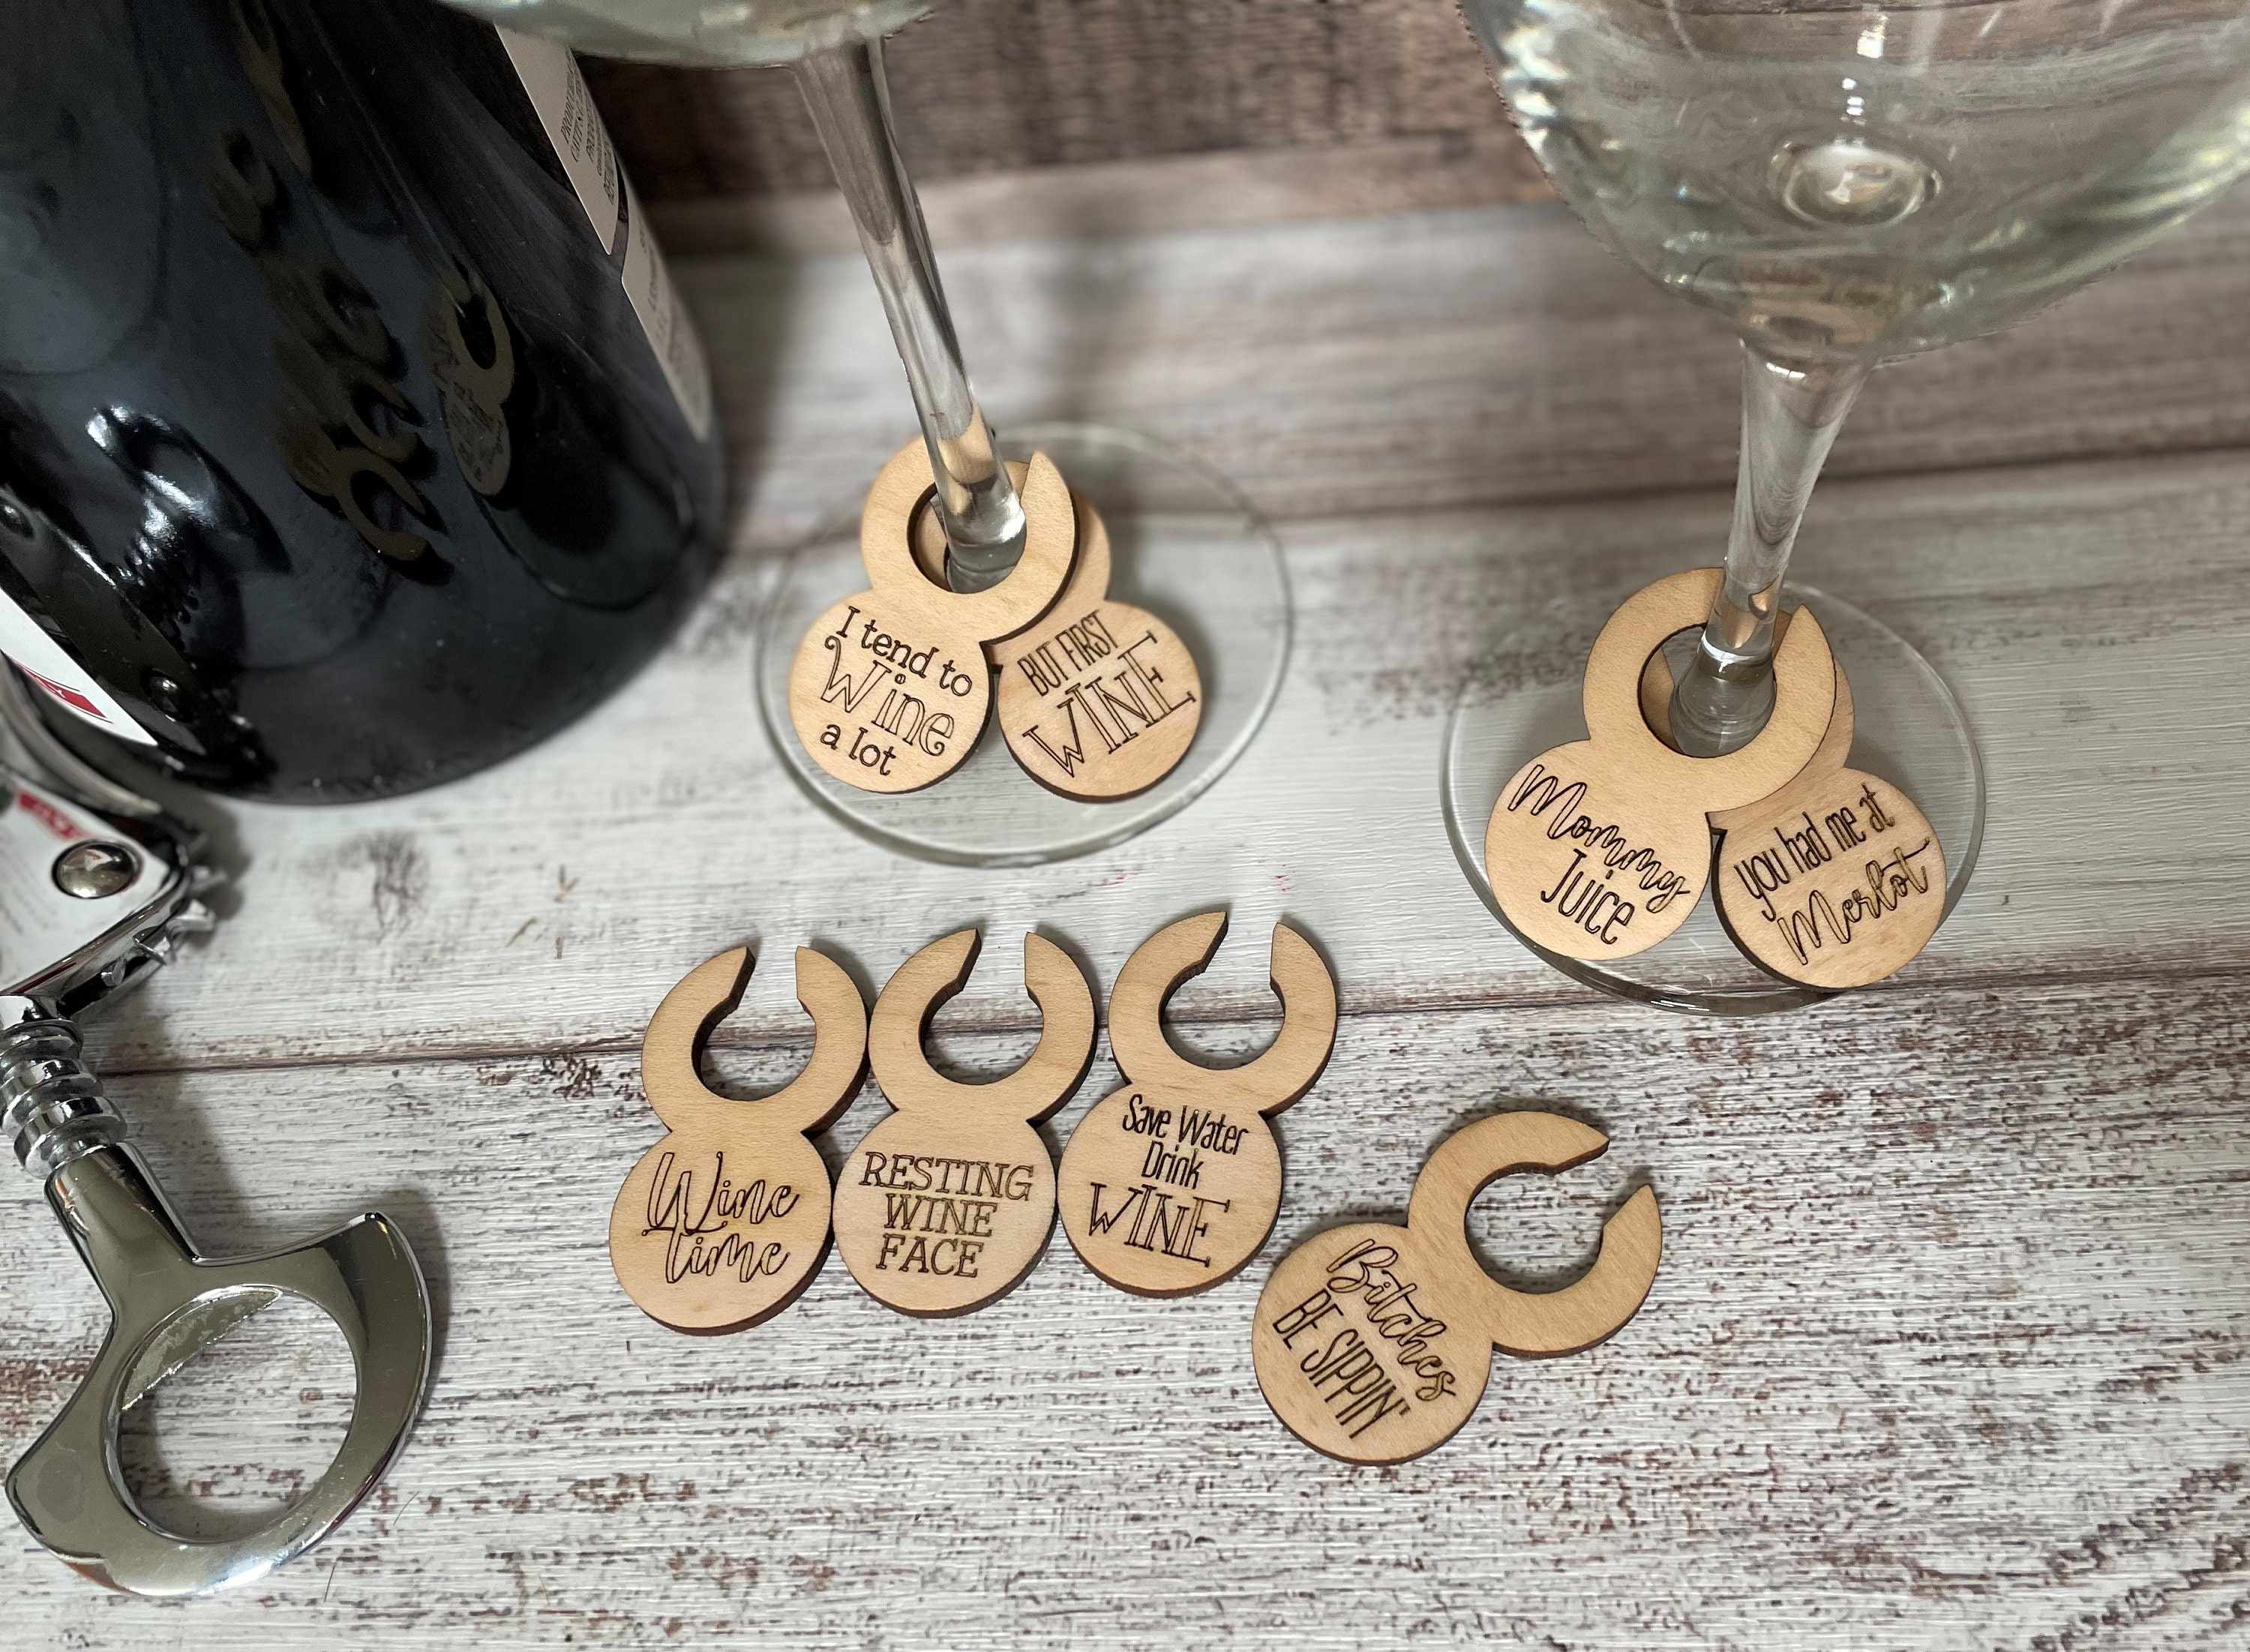 Silver, Gold & Rose Gold Wine Rings for DIY Wine Charms, Earring Hoop Rings,  Wine Glass Charm Rings, 20mm With Bent End, 10 or 25 Pieces 